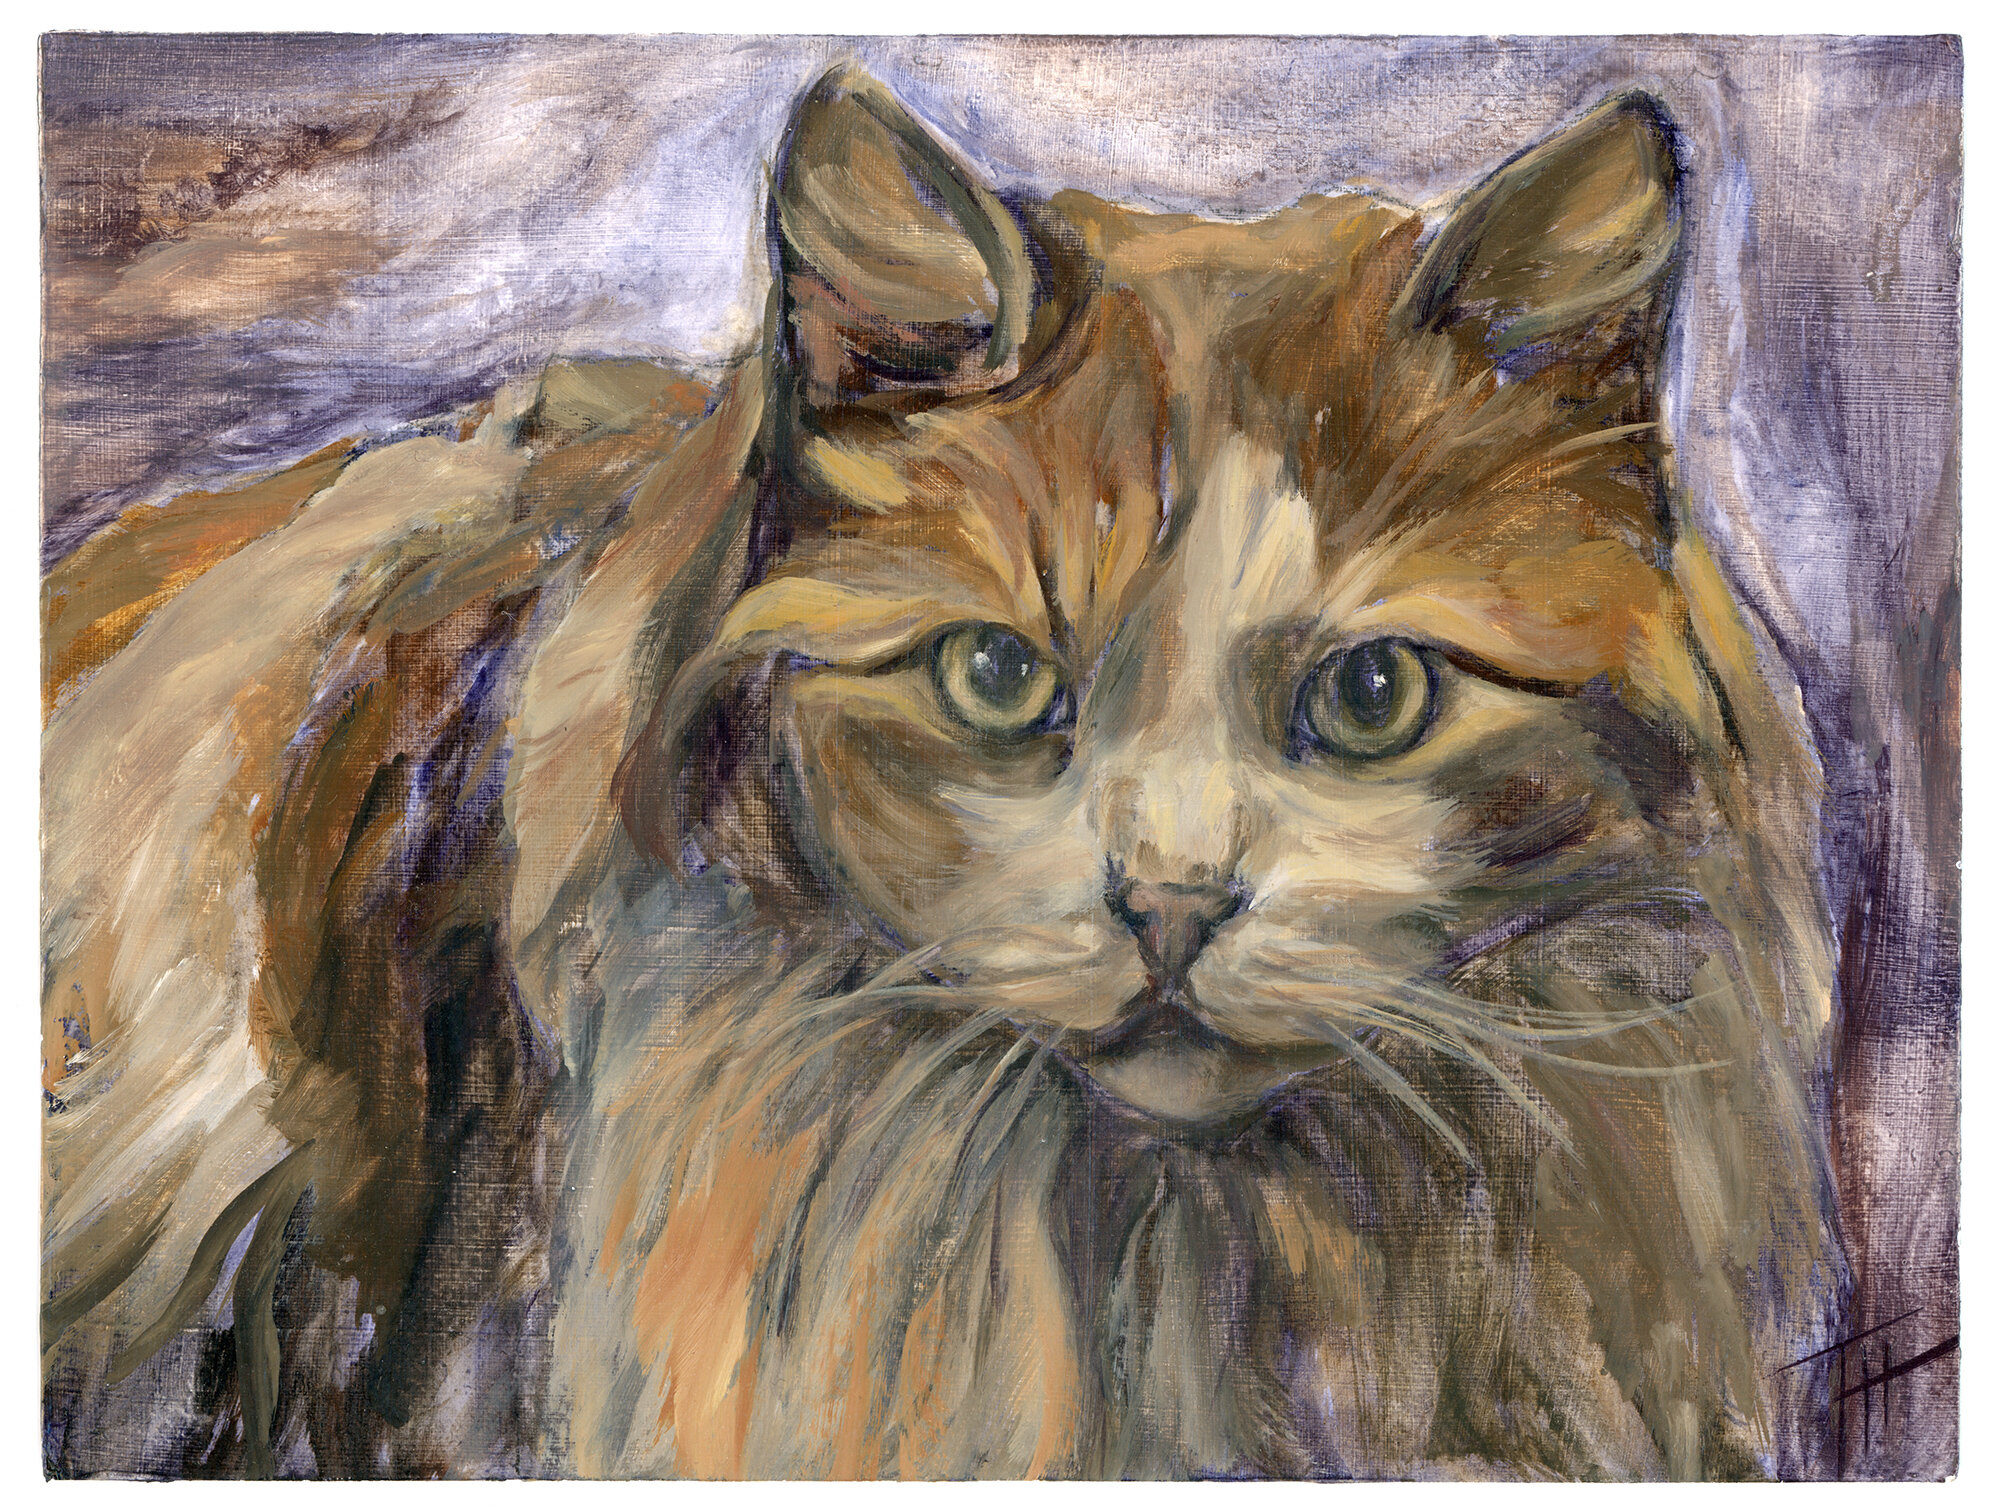  Peashe ("Kitty"), 2020. 6x8 in. Oil on paper. 